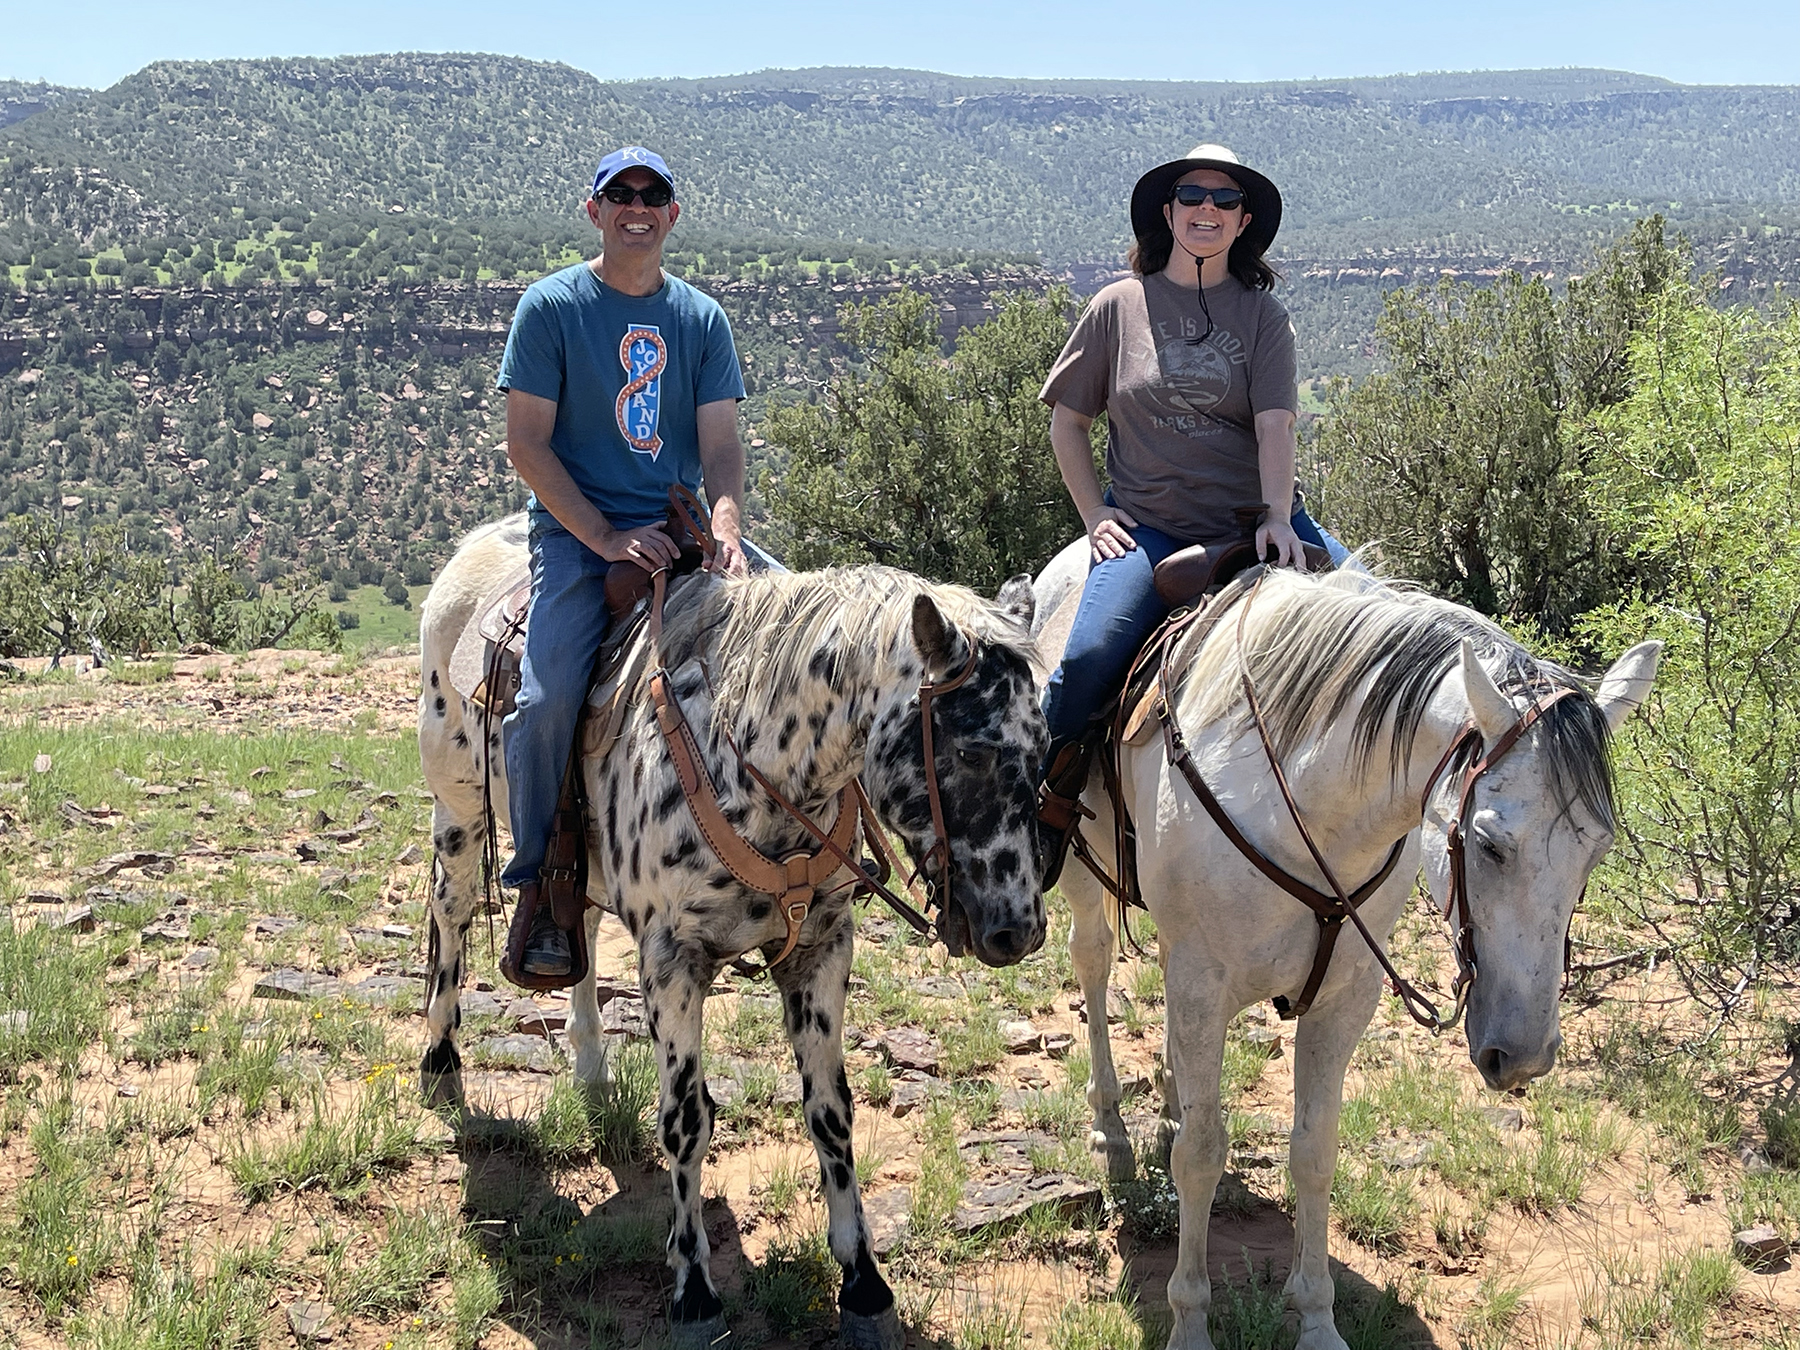 The author and her husband exploring some of the 14,000 acres at Canyon Madness Ranch in northeastern New Mexico. The ranch has a full equestrian program and staff can customize an experience to guests' experience level. Photo by MeLinda Schnyder.